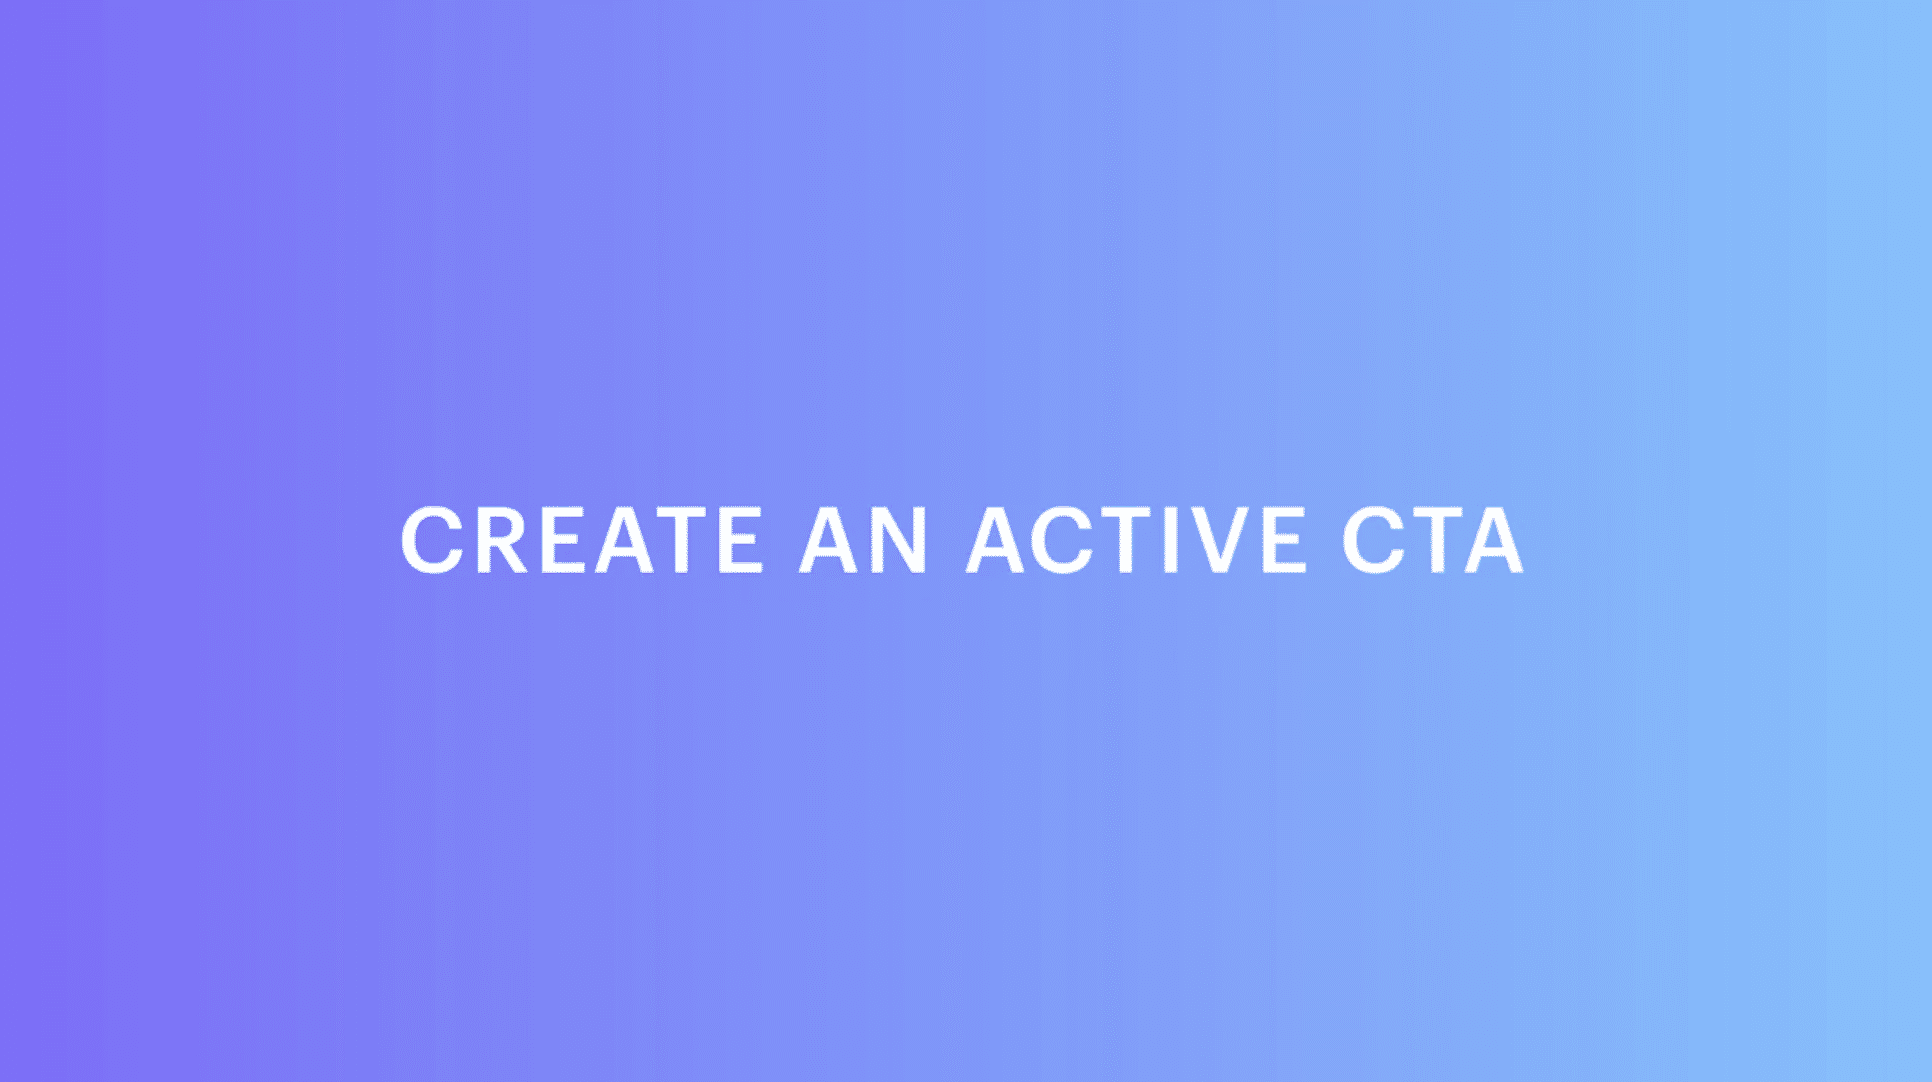 Urgency words: Create an active CTA to create urgency in the inbox